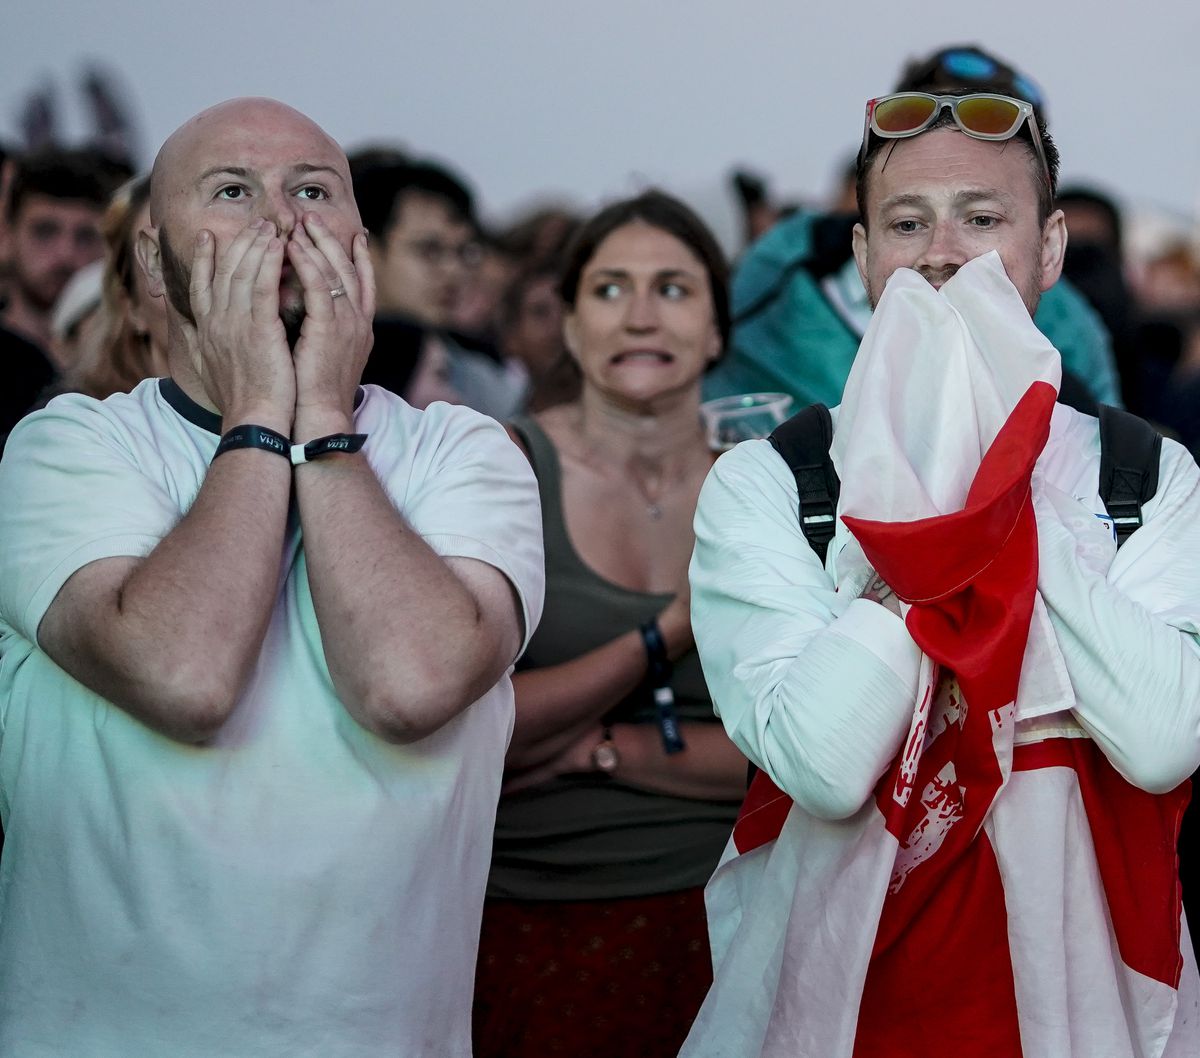 Football Fans Gather To Watch England Play Croatia For A Place In The World Cup Final